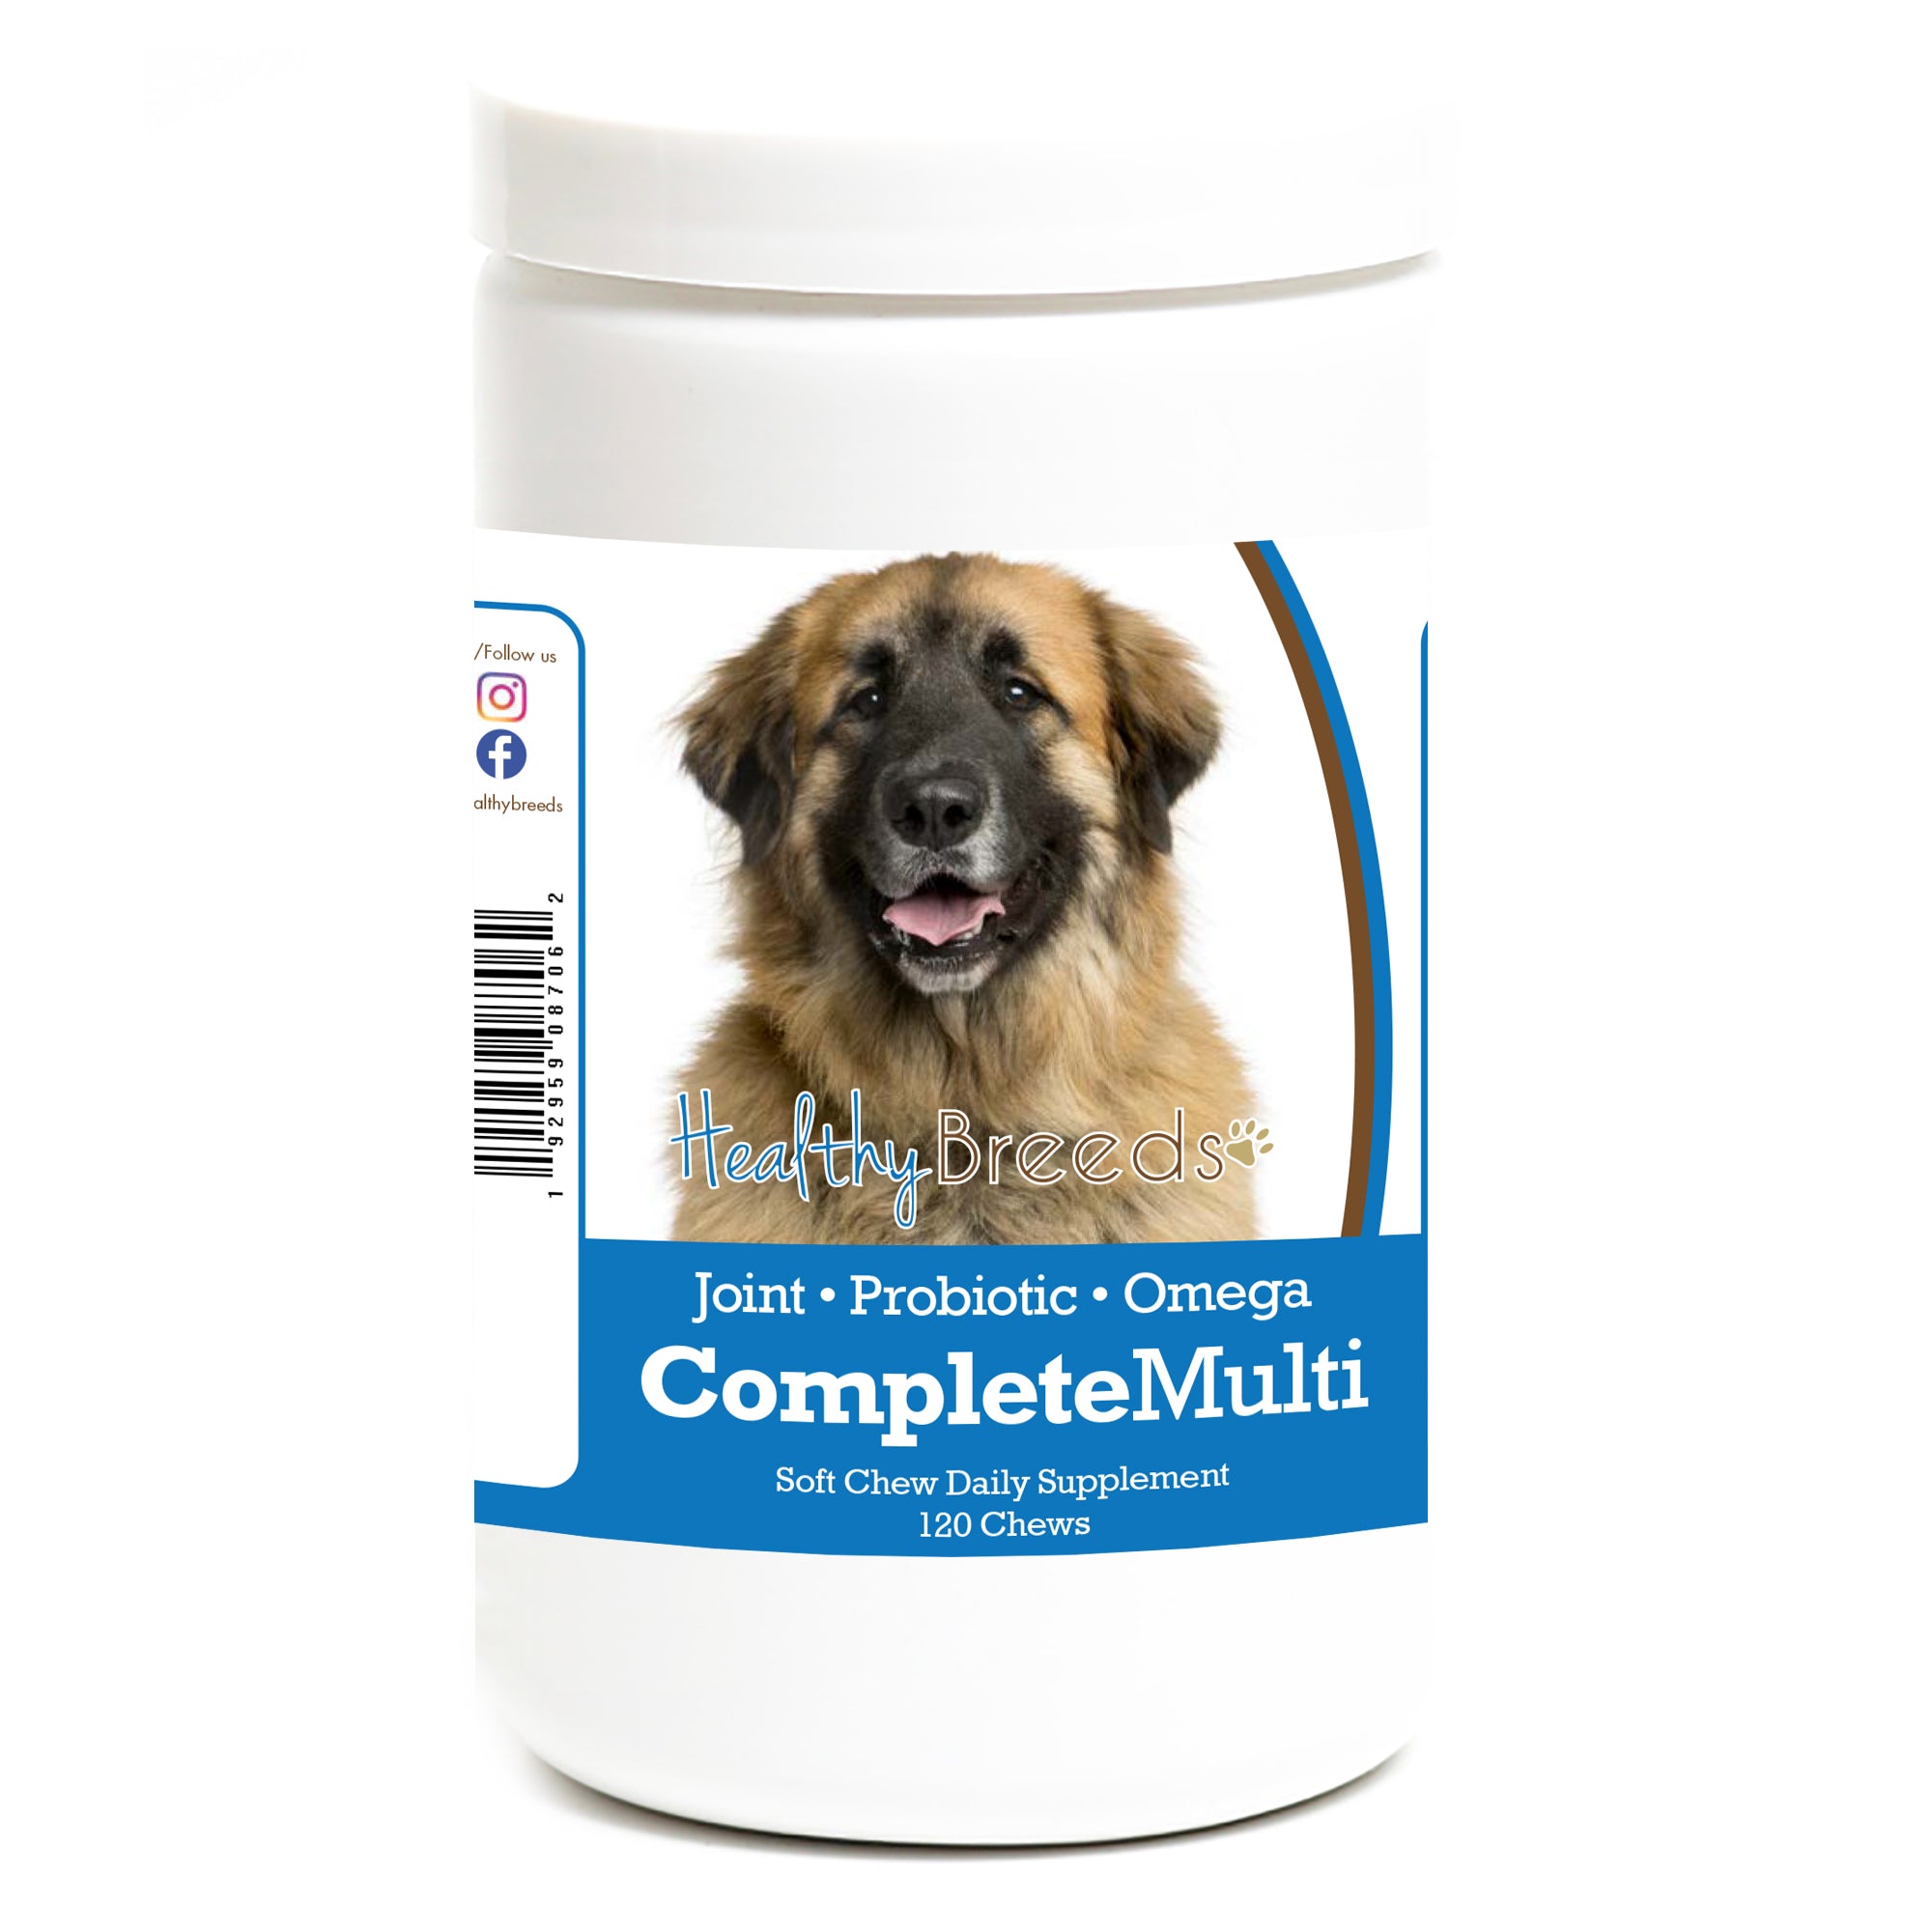 Leonberger All In One Multivitamin Soft Chew 120 Count